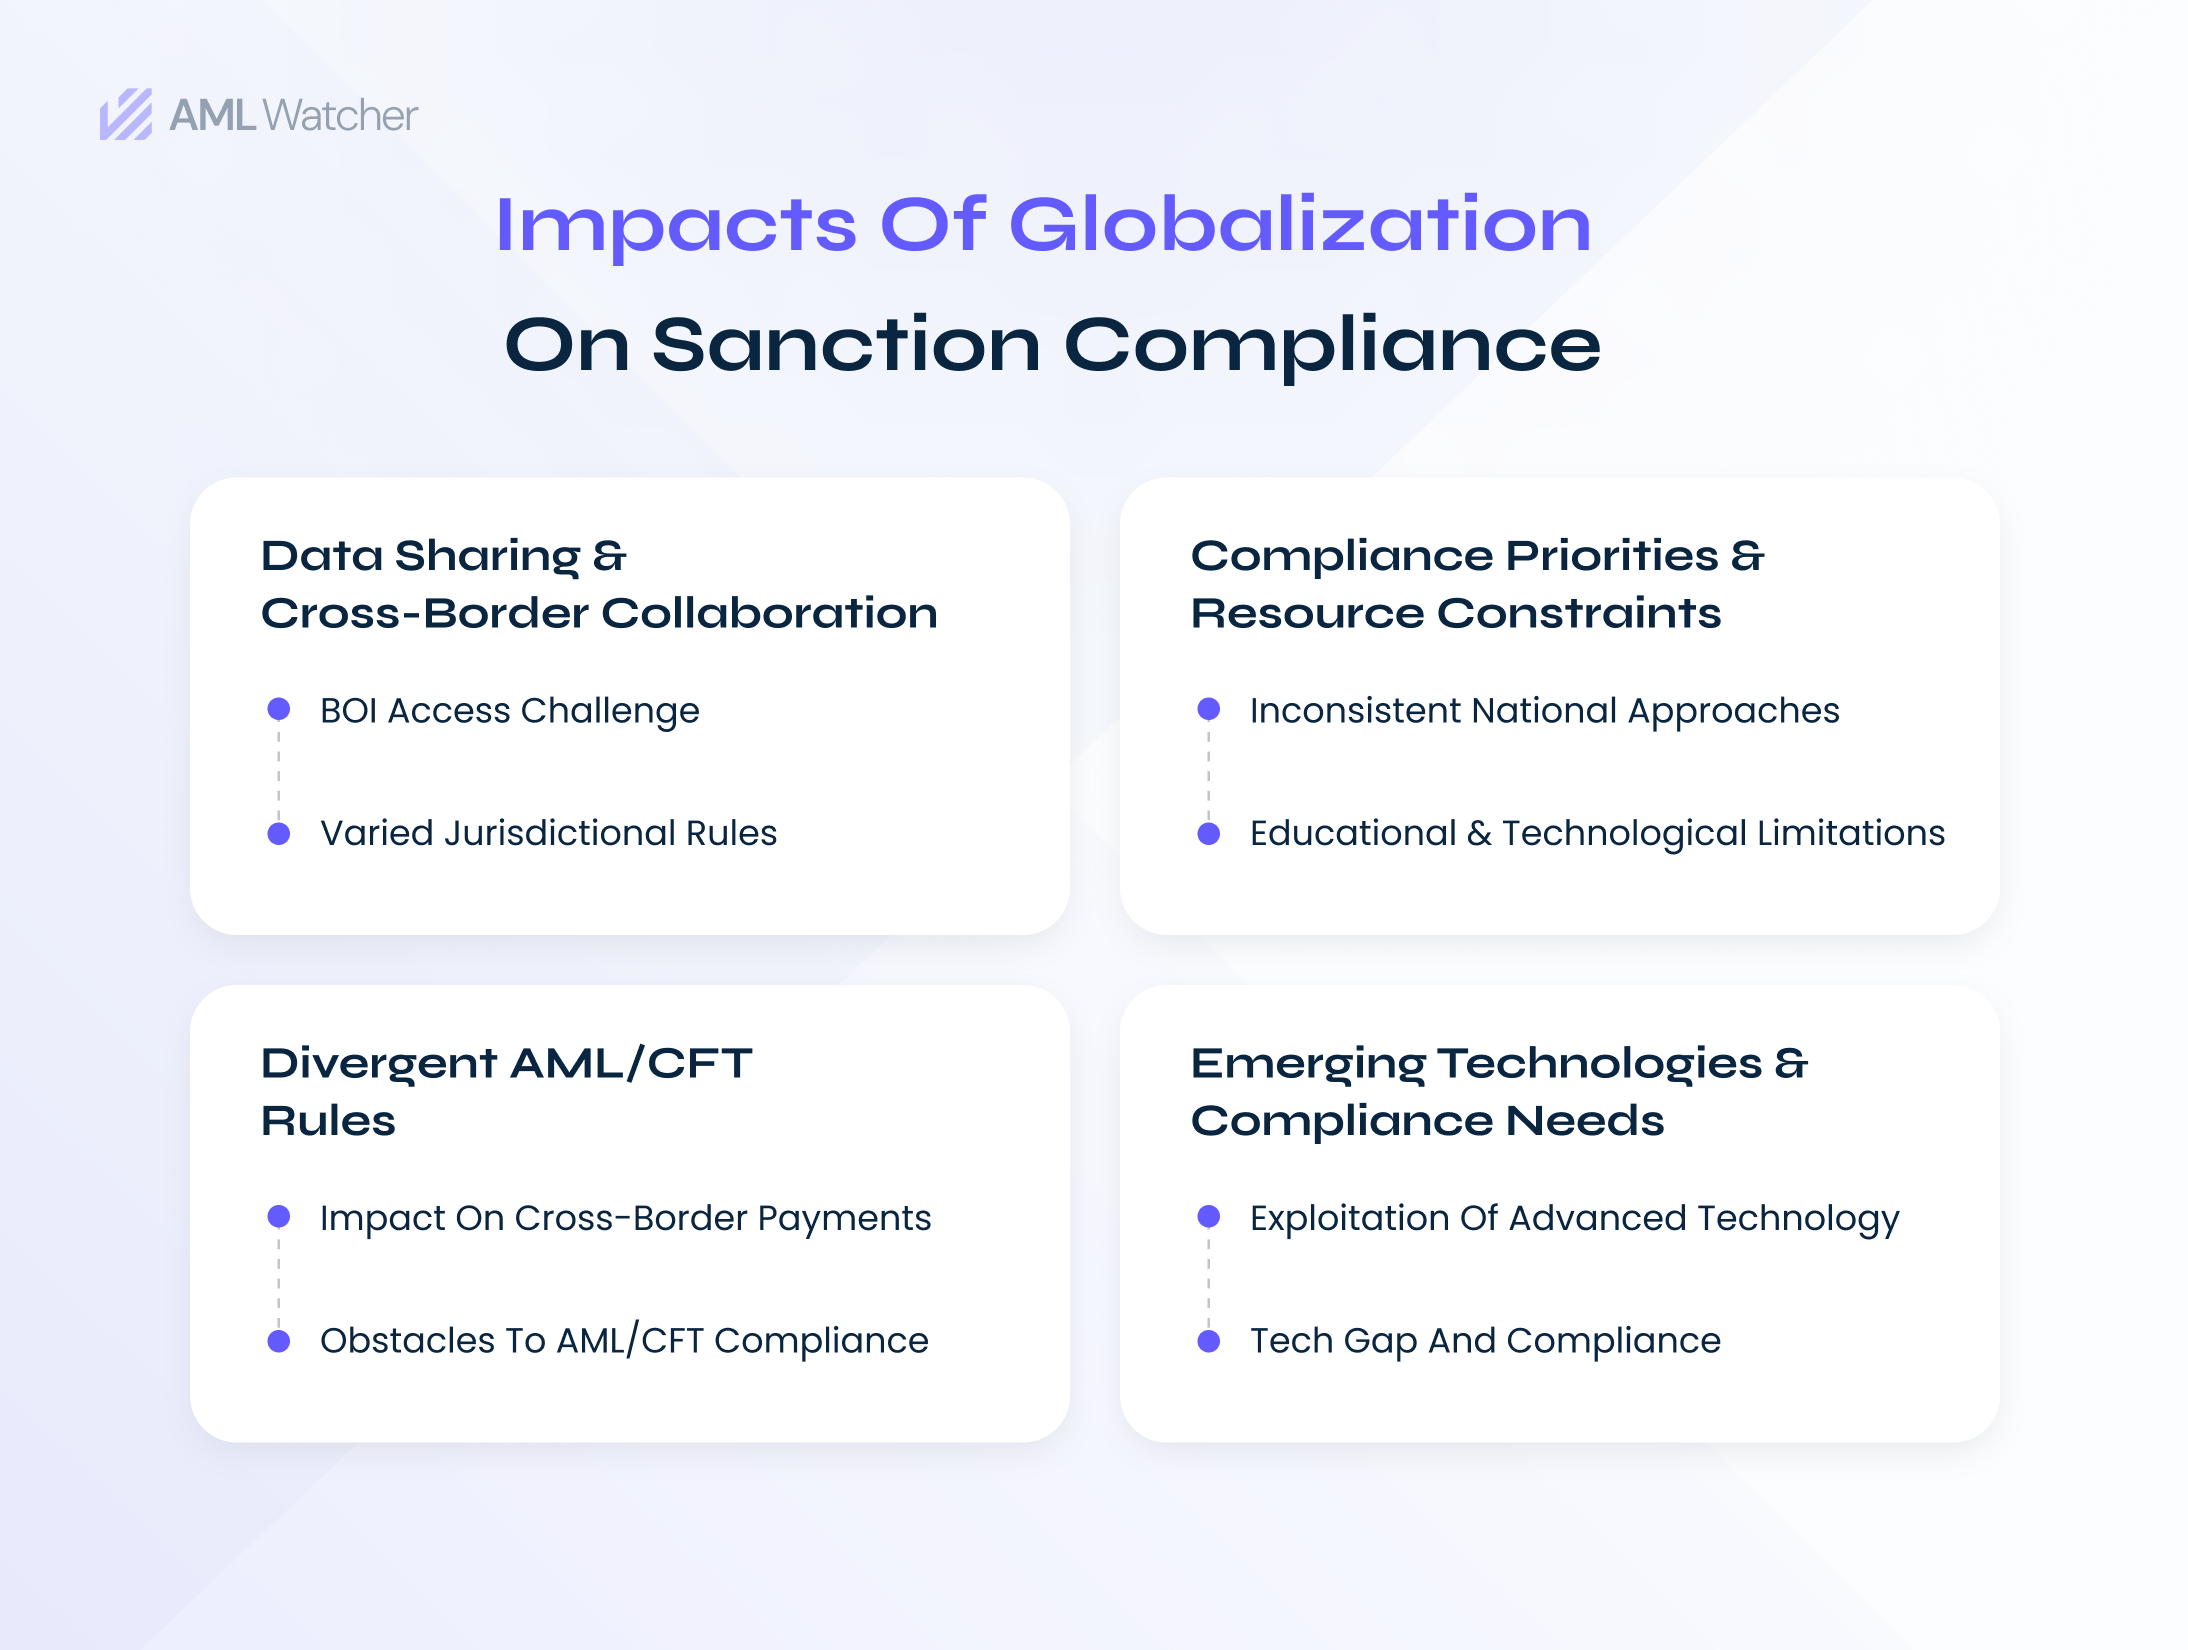 a brief visual representation of factors impacting the sanction check efficiency including divergent AML/CFT rules, data privacy and sharing, resource constraints, and tech gaps to fetch the criminal acts.